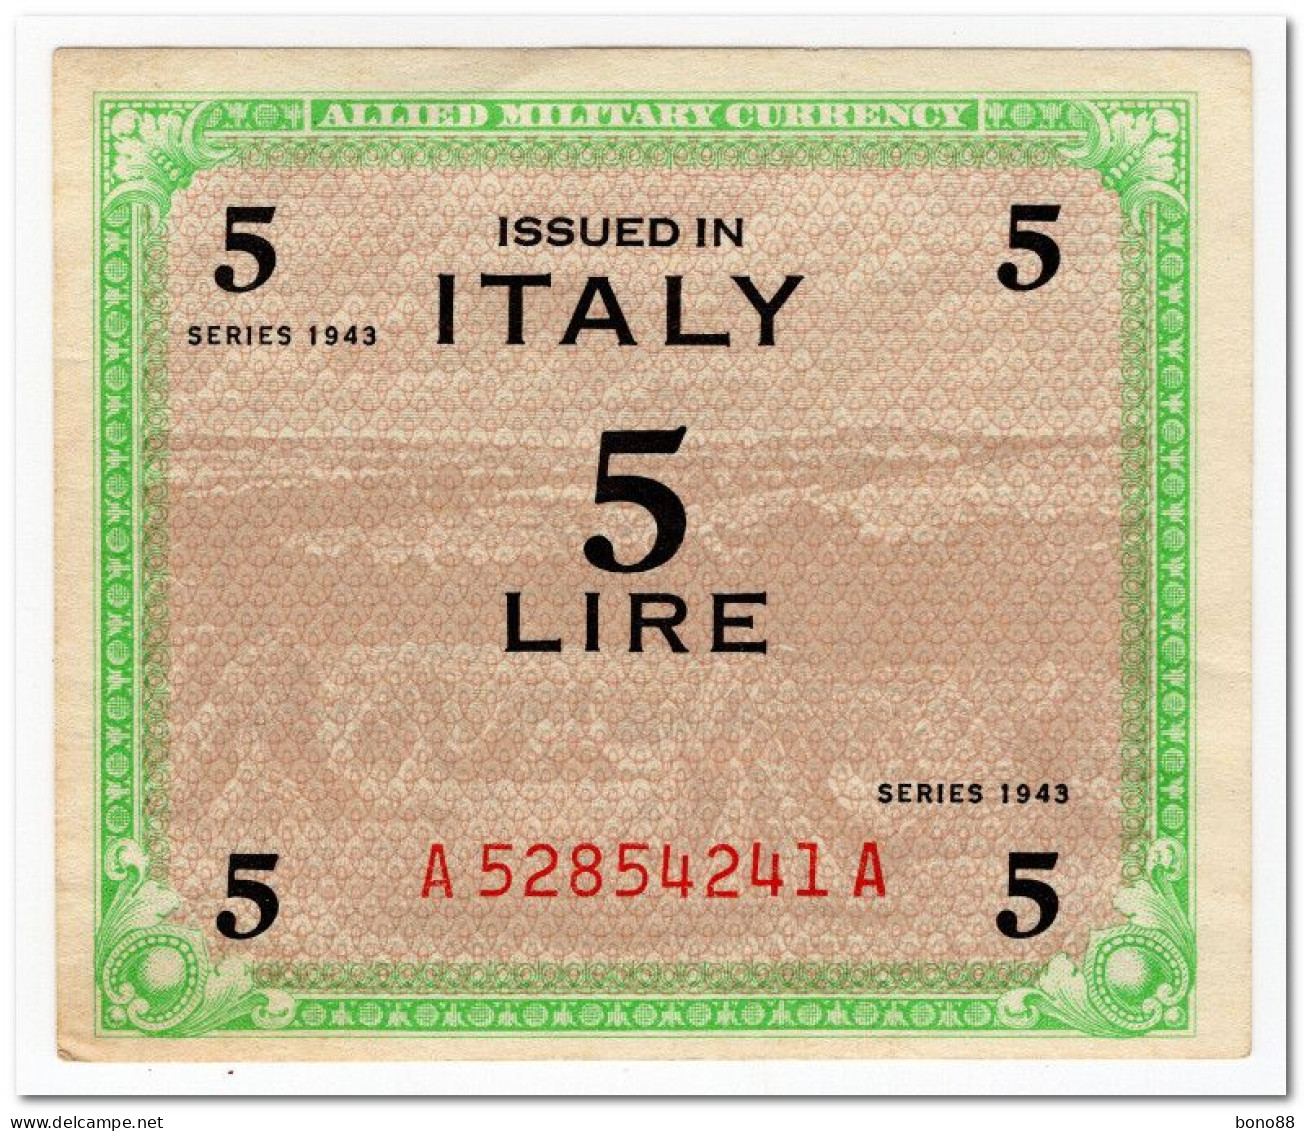 ITALY,ALLIED MILITARY CURRENCY,5 LIRE,1943,P.M12,XF+ - Allied Occupation WWII